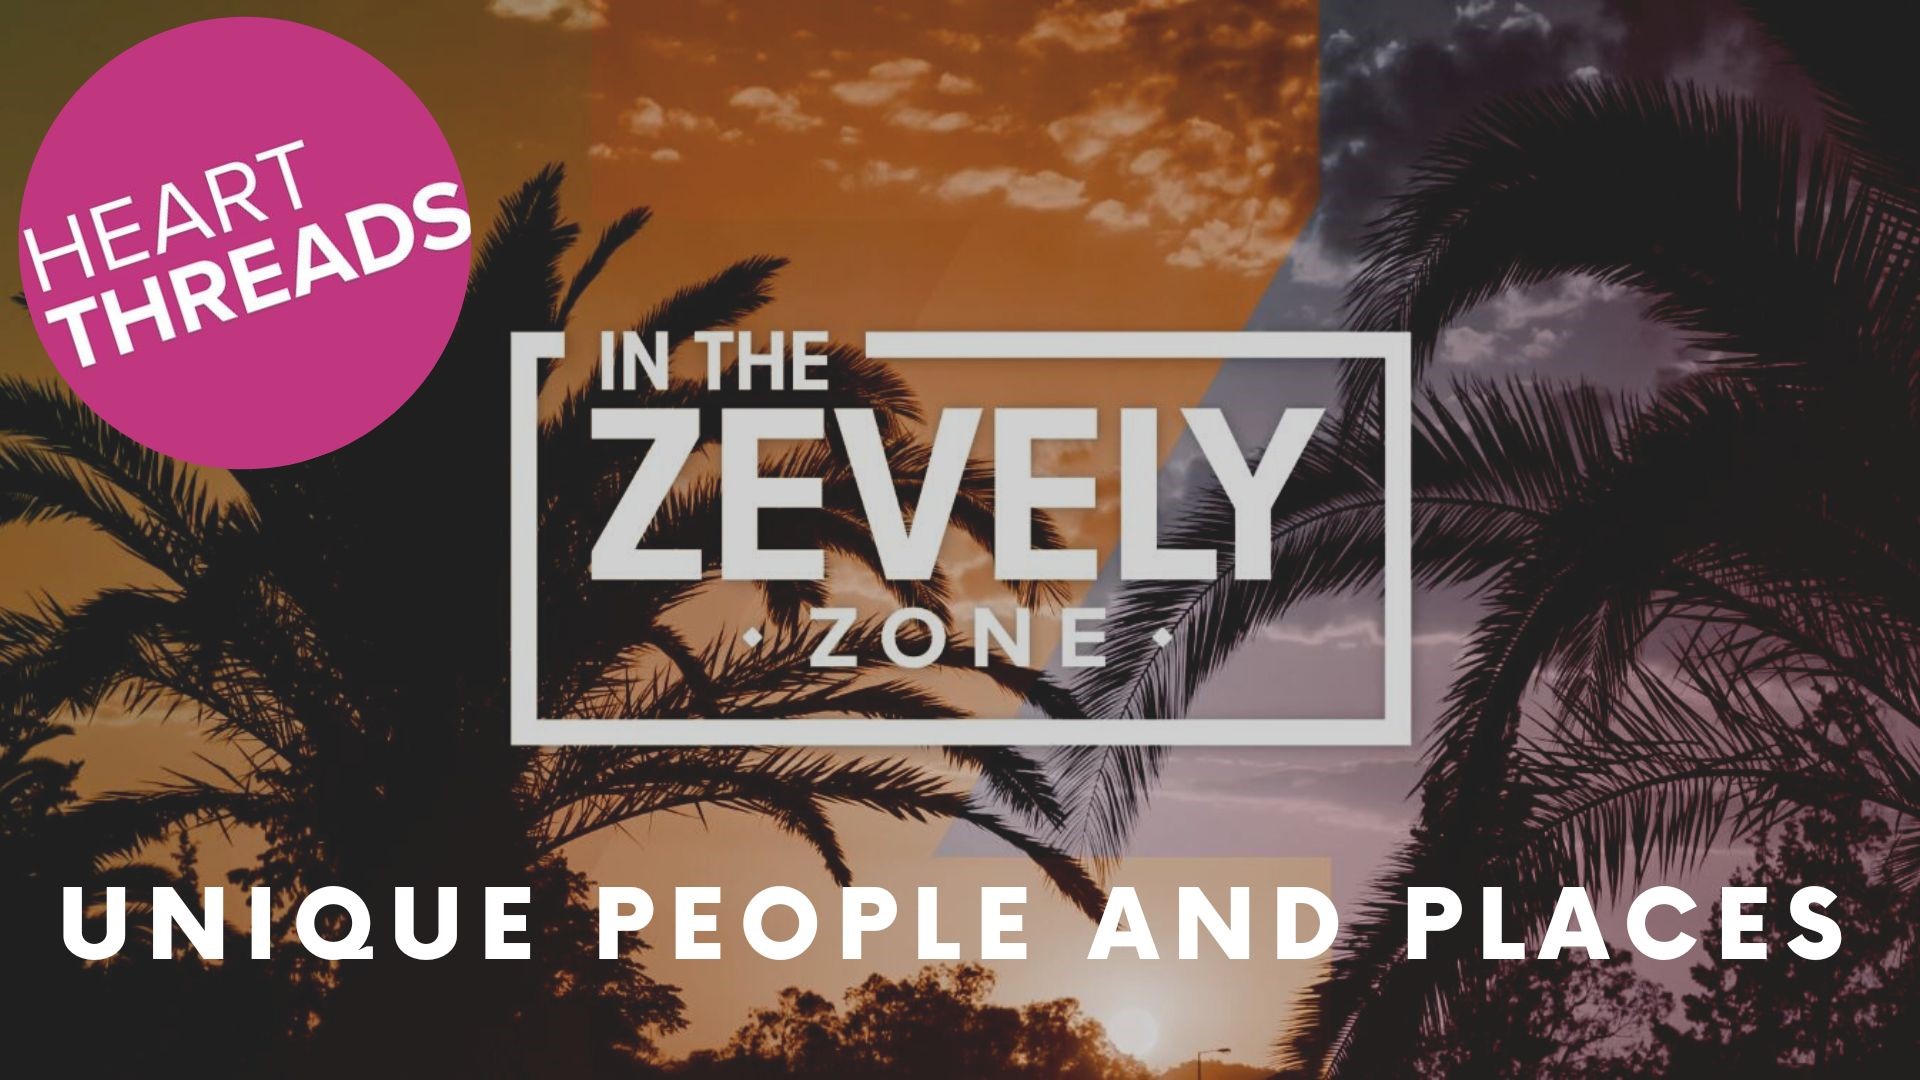 A special edition of HeartThreads with KFMB's Jeff Zevely, as he shows us stories of some of the most unique people and places he's come across.